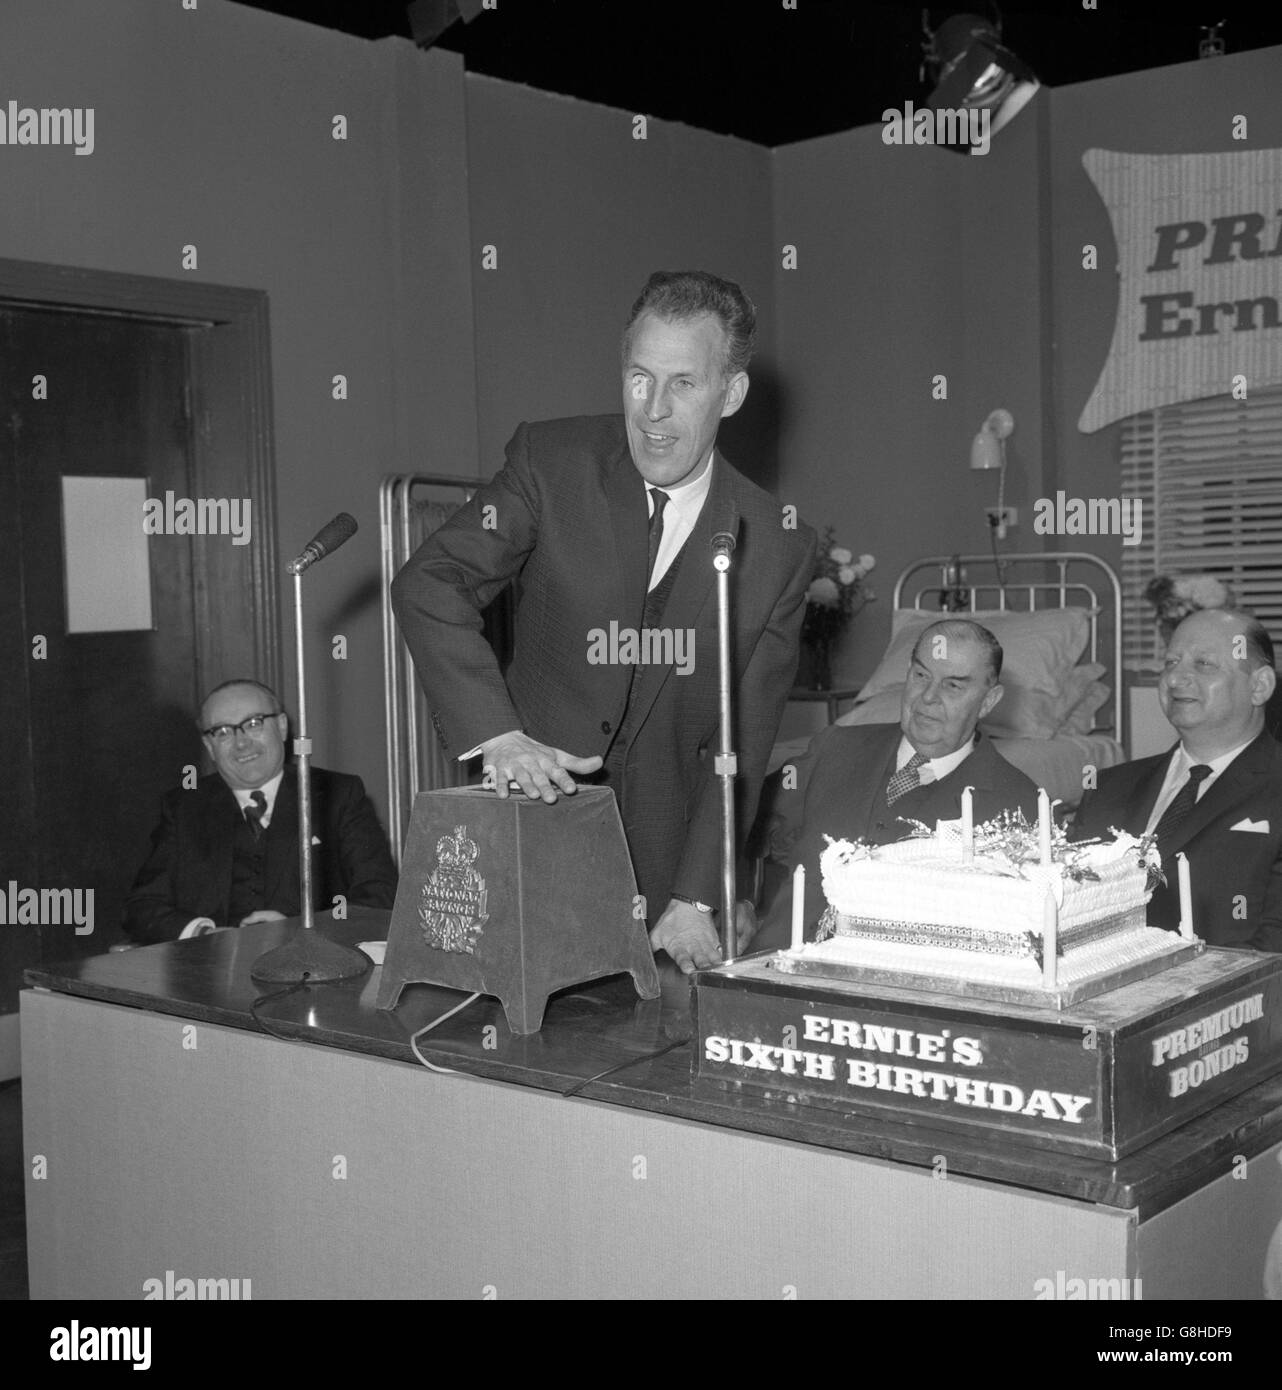 Television entertainer Bruce Forsyth pushes the button to start by remote control 'Ernie', the Premium Bonds electronic selection device based at Lytham St Annes, Lancashire, during a birthday ceremony at the ATV Studios, Elstree, Hertfordshire. Even a special cake had been baked to celebrate the sixth birthday of the Premium Bonds scheme. Looking on (centre) is Viscount Mackintosh of Halifax, chairman of the National Savings Committee. Stock Photo